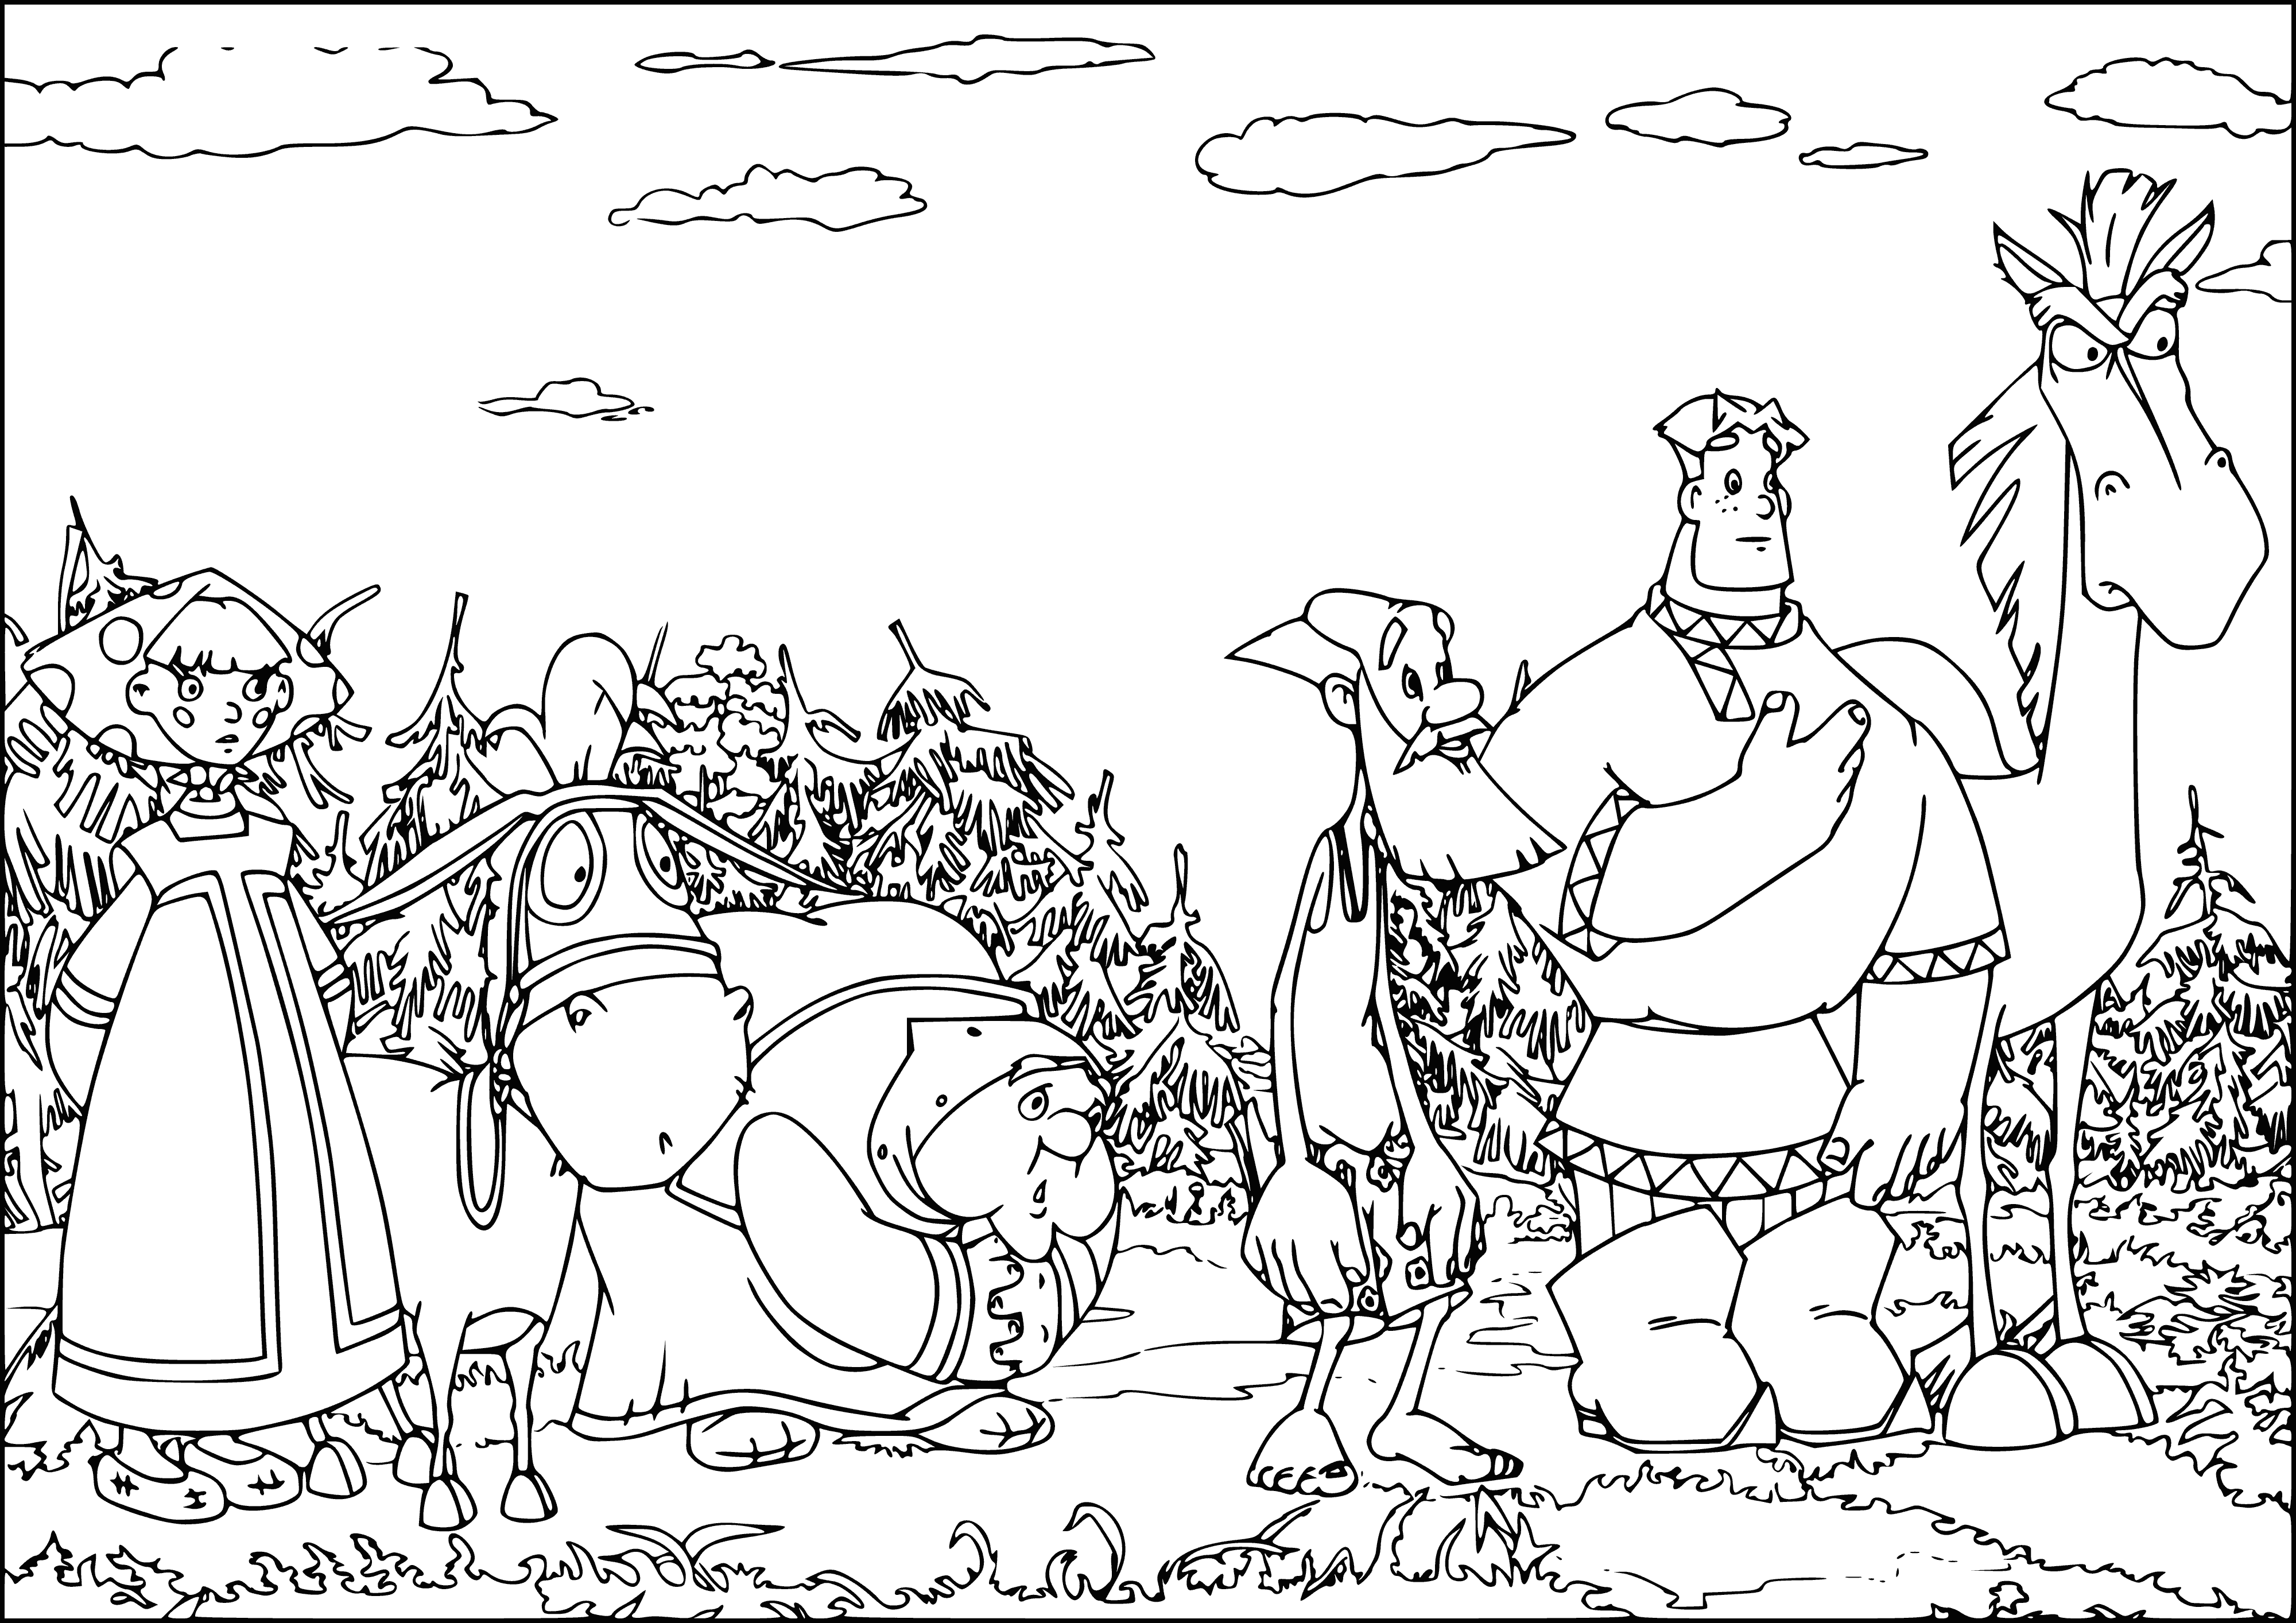 coloring page: Alyosha and Tugarin are in a standoff, with Alyosha armed and Prokhor anxiously looking on. The woman tries to calm him while Alyosha is determined to win.